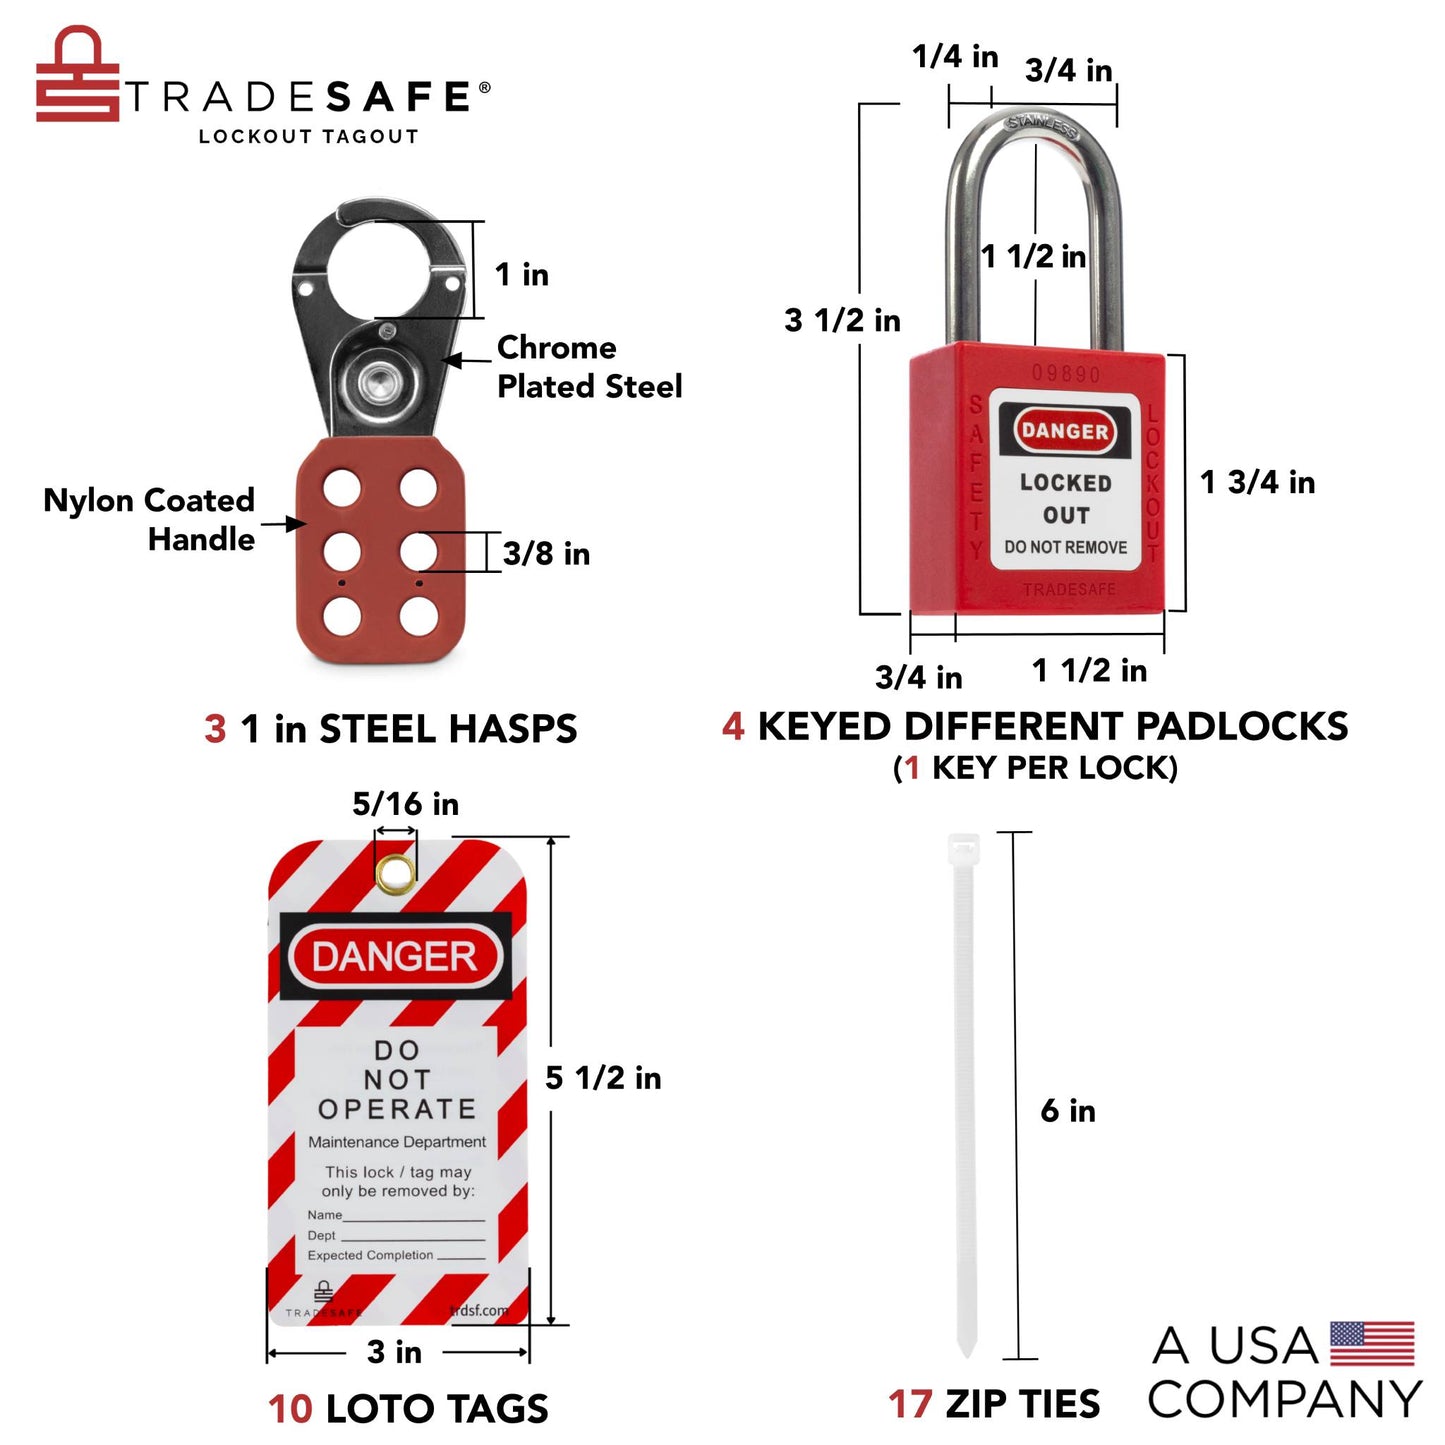 3 1-inch steel hasps, 4 keyed different padlocks with 1 key per lock, 10 loto tags, and 17 zip ties